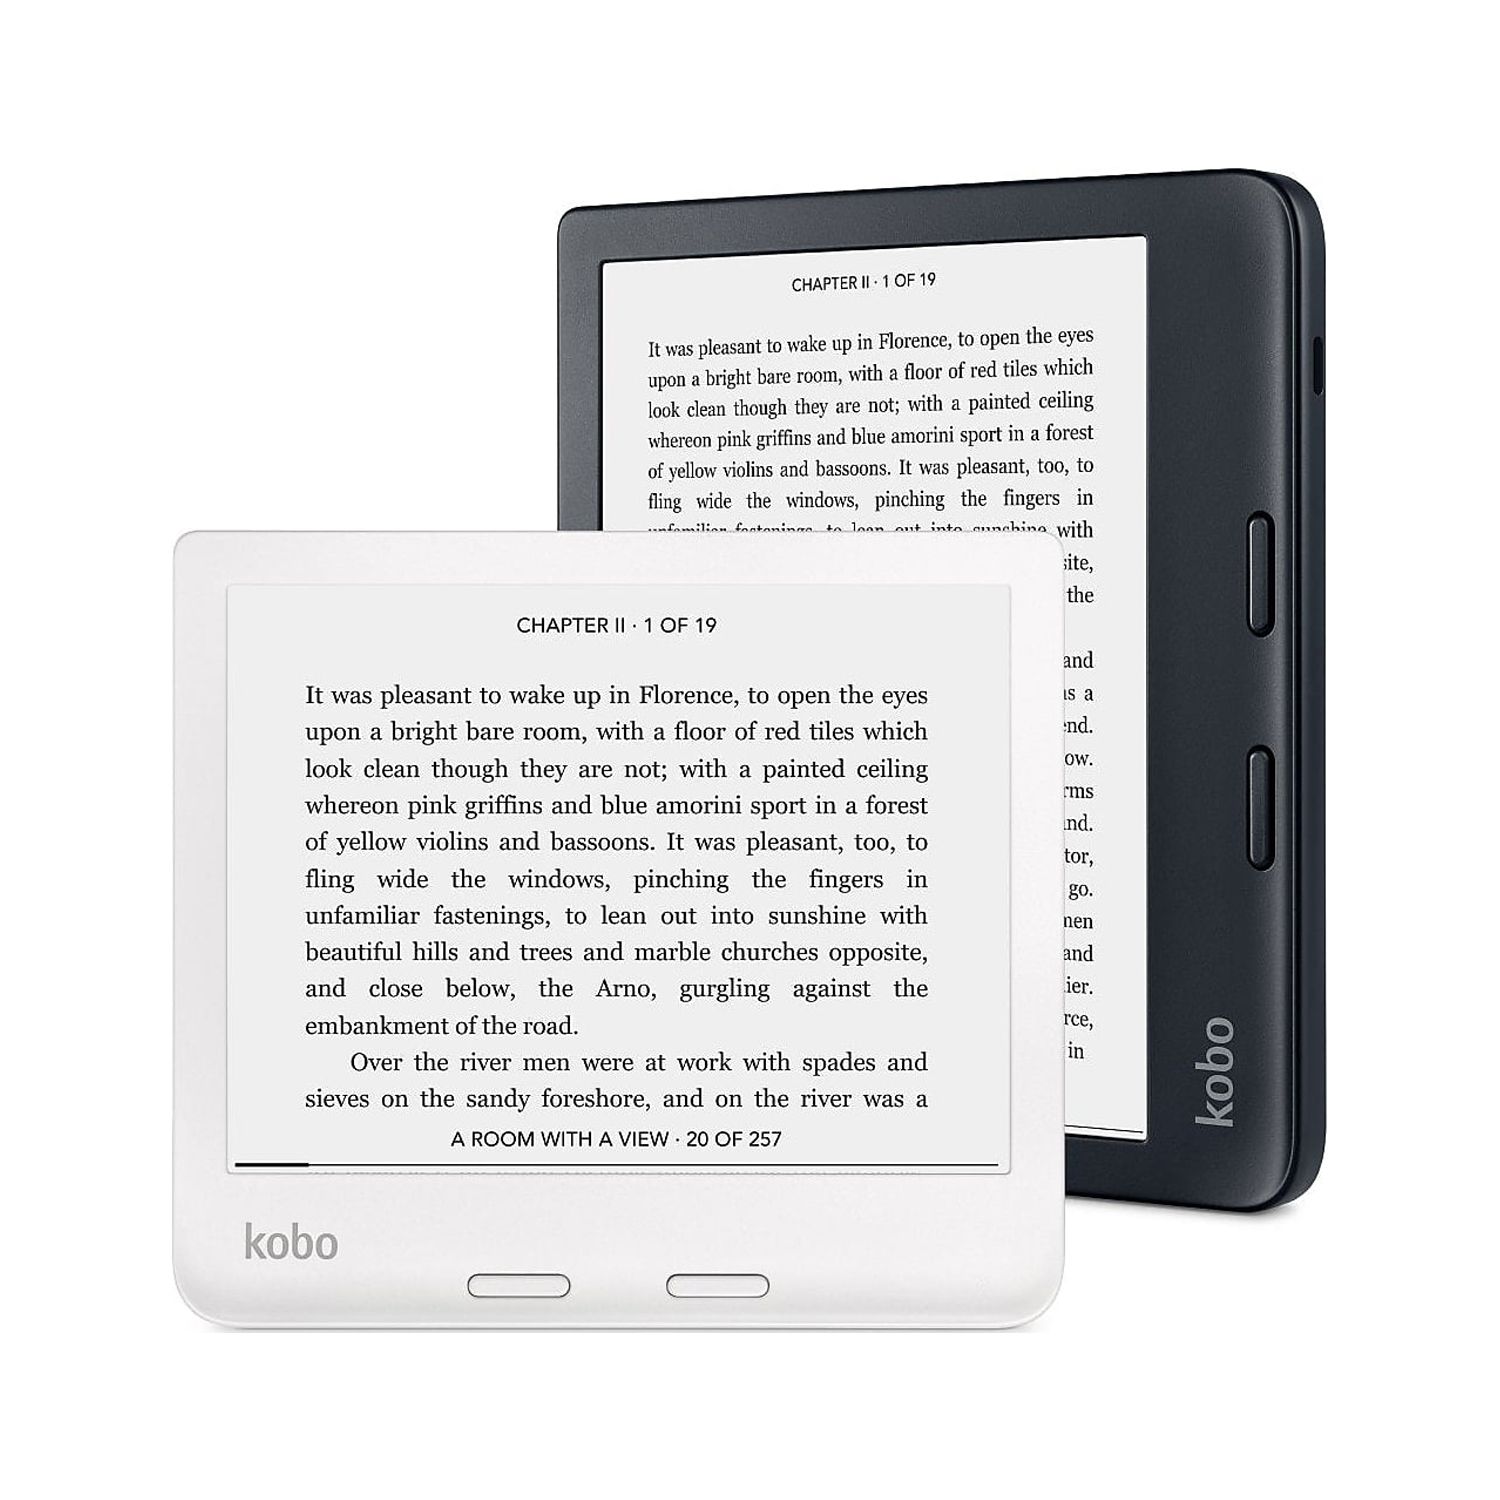 Kobo Libra 2 | eReader | 7? Glare Free Touchscreen | Waterproof | Adjustable Brightness and Color Temperature | Blue Light Reduction | eBooks | WiFi | 32GB of Storage | Carta E Ink Technology | Black - image 4 of 5